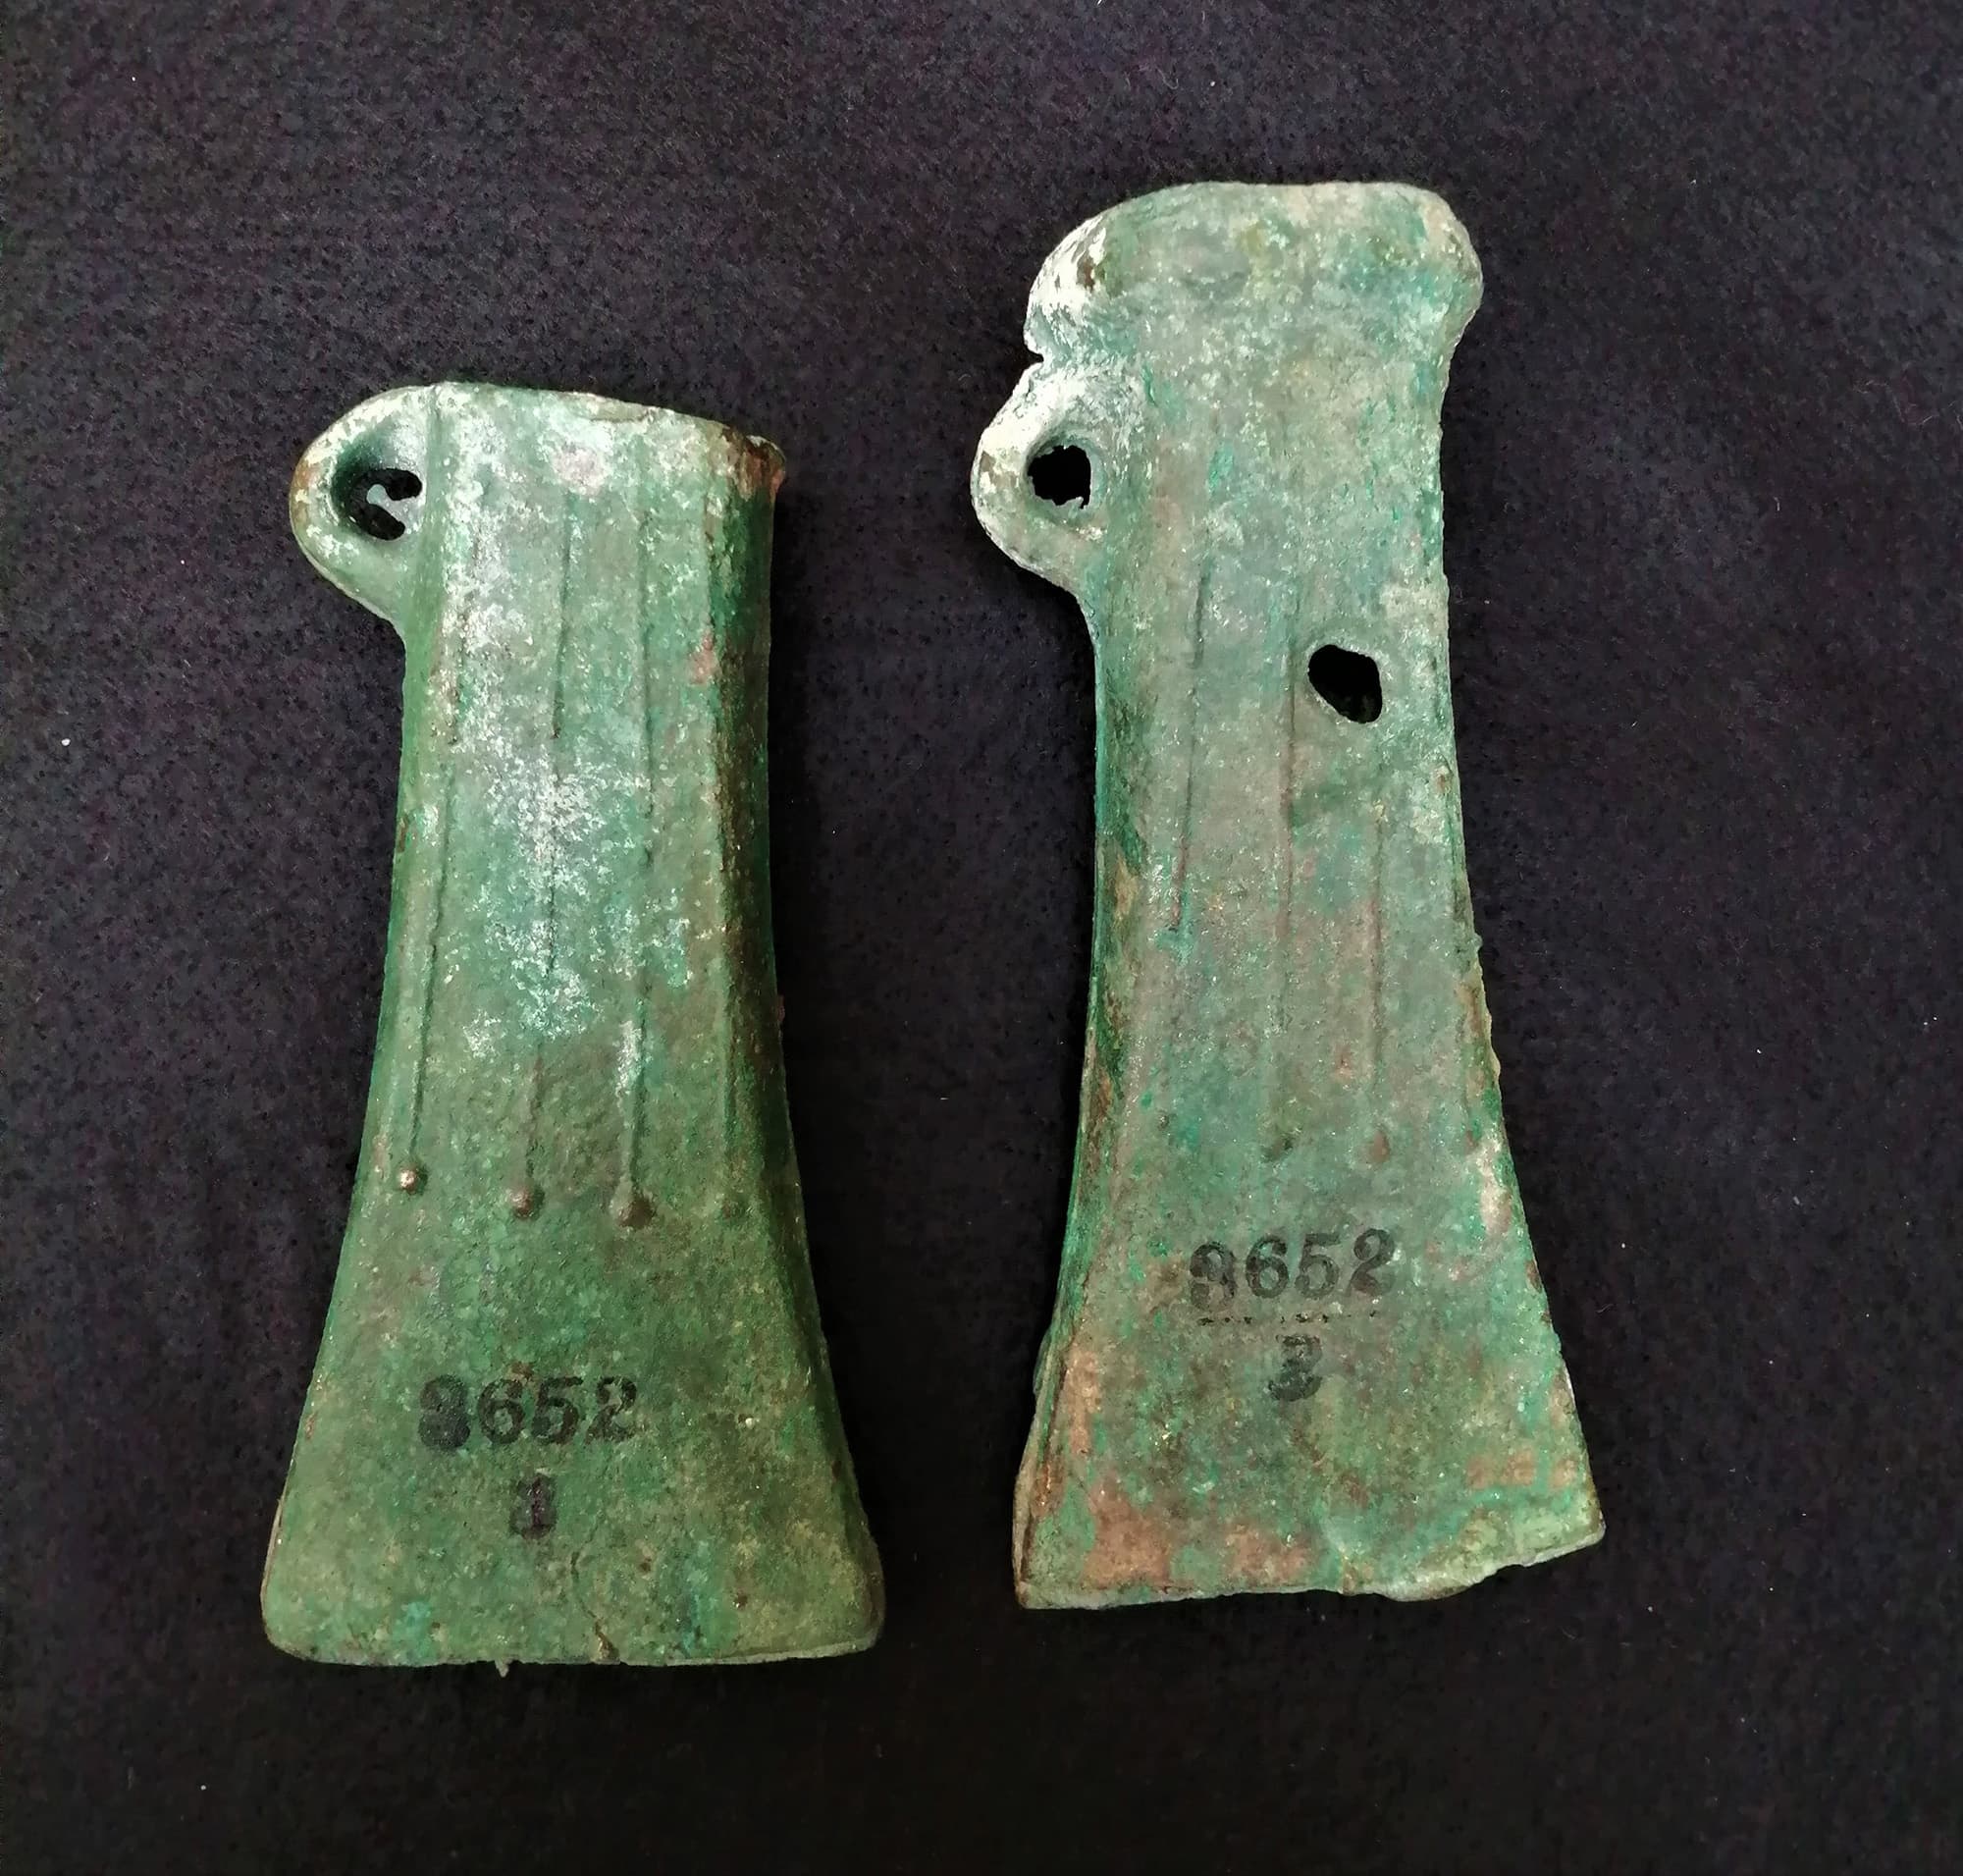 Two axes from the same mould showing casting mistakes